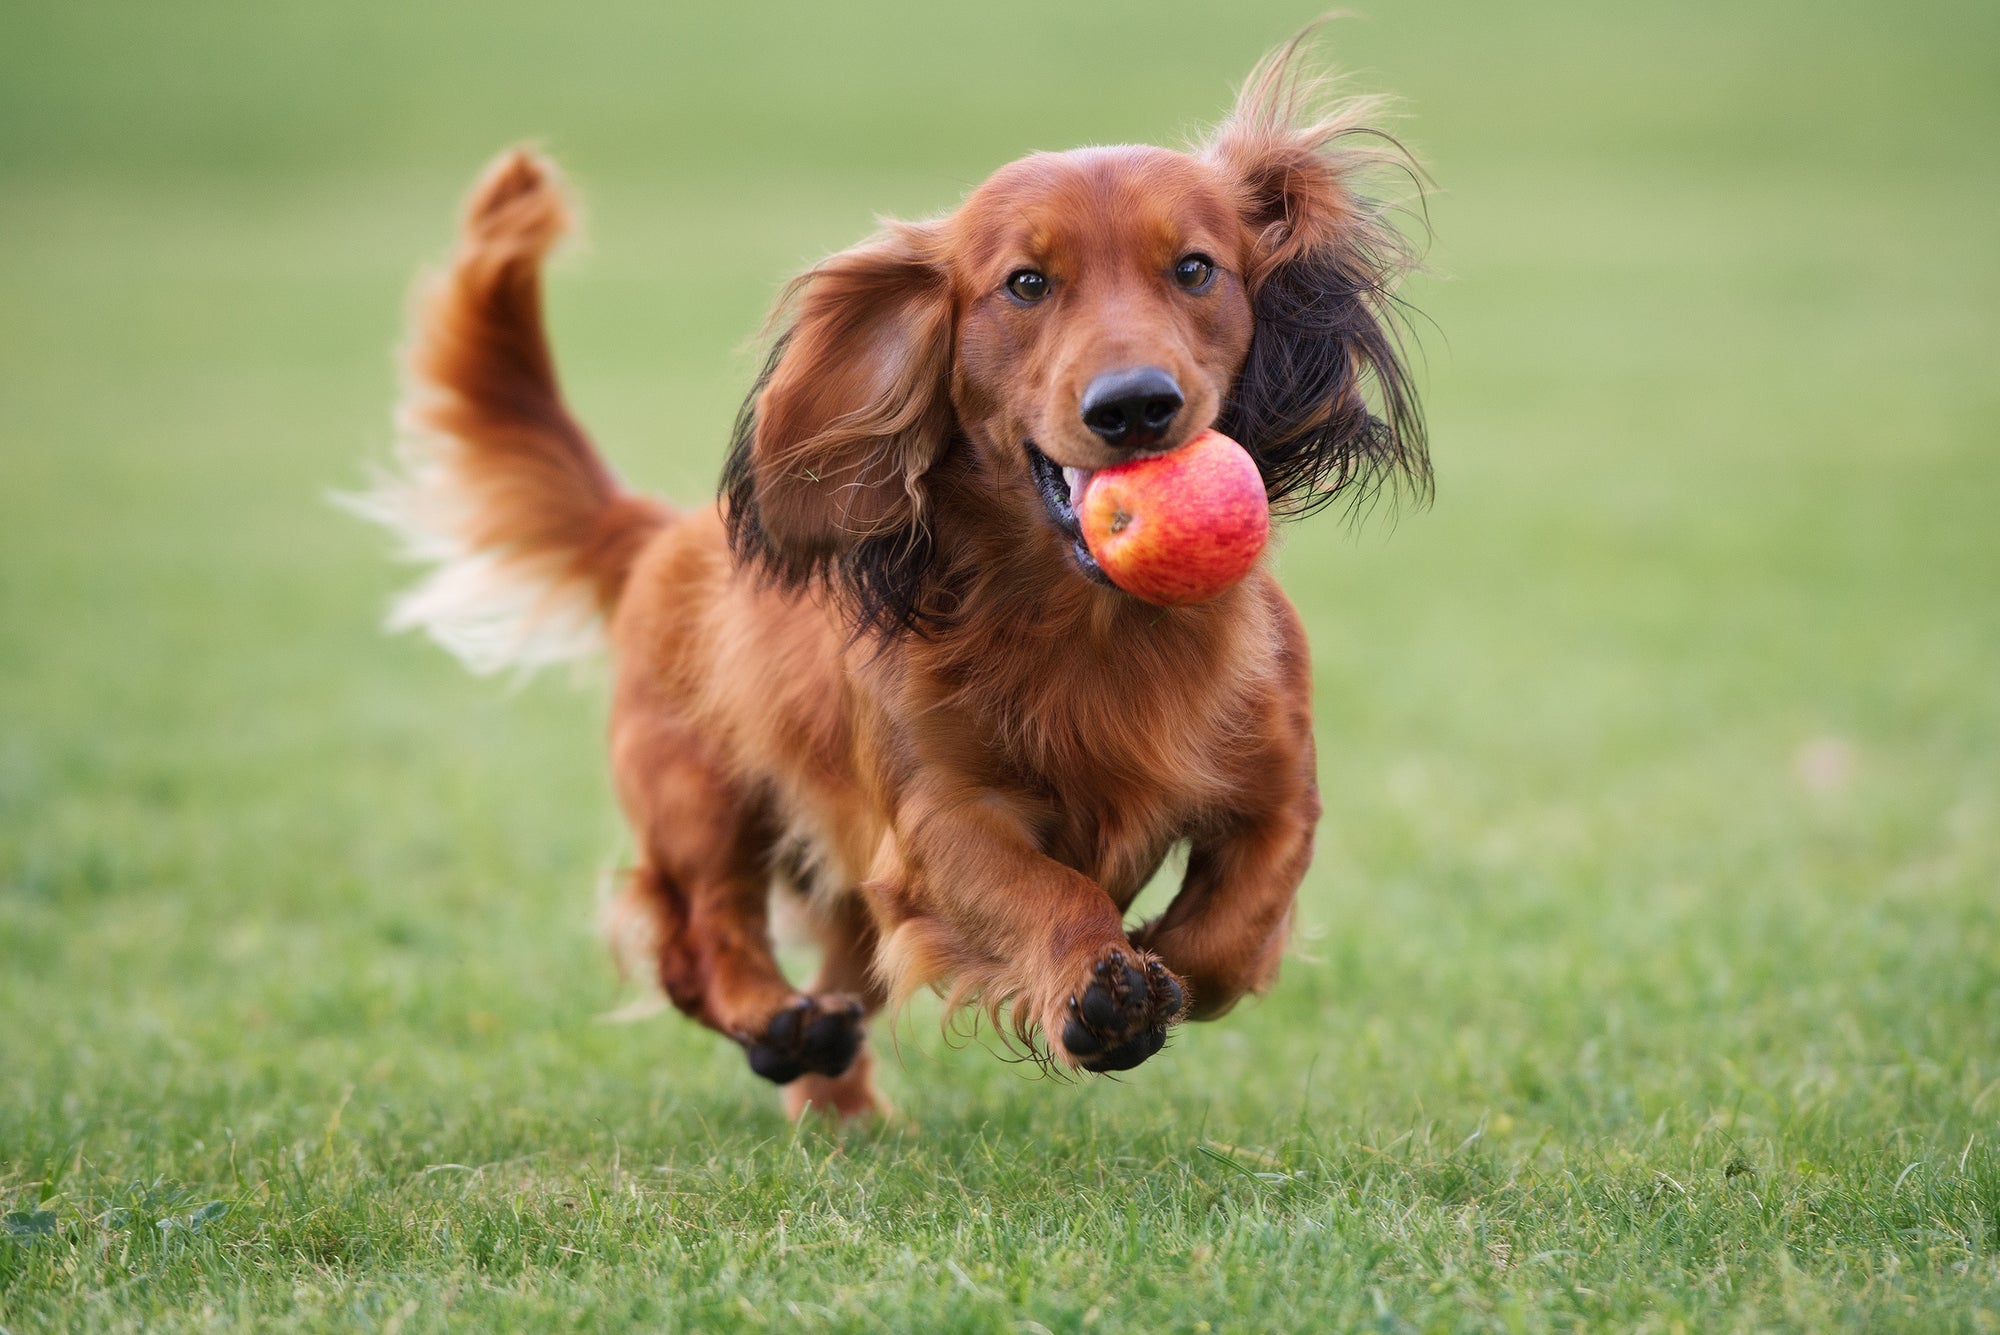 Can Dogs Eat Apples? Here's What Happens